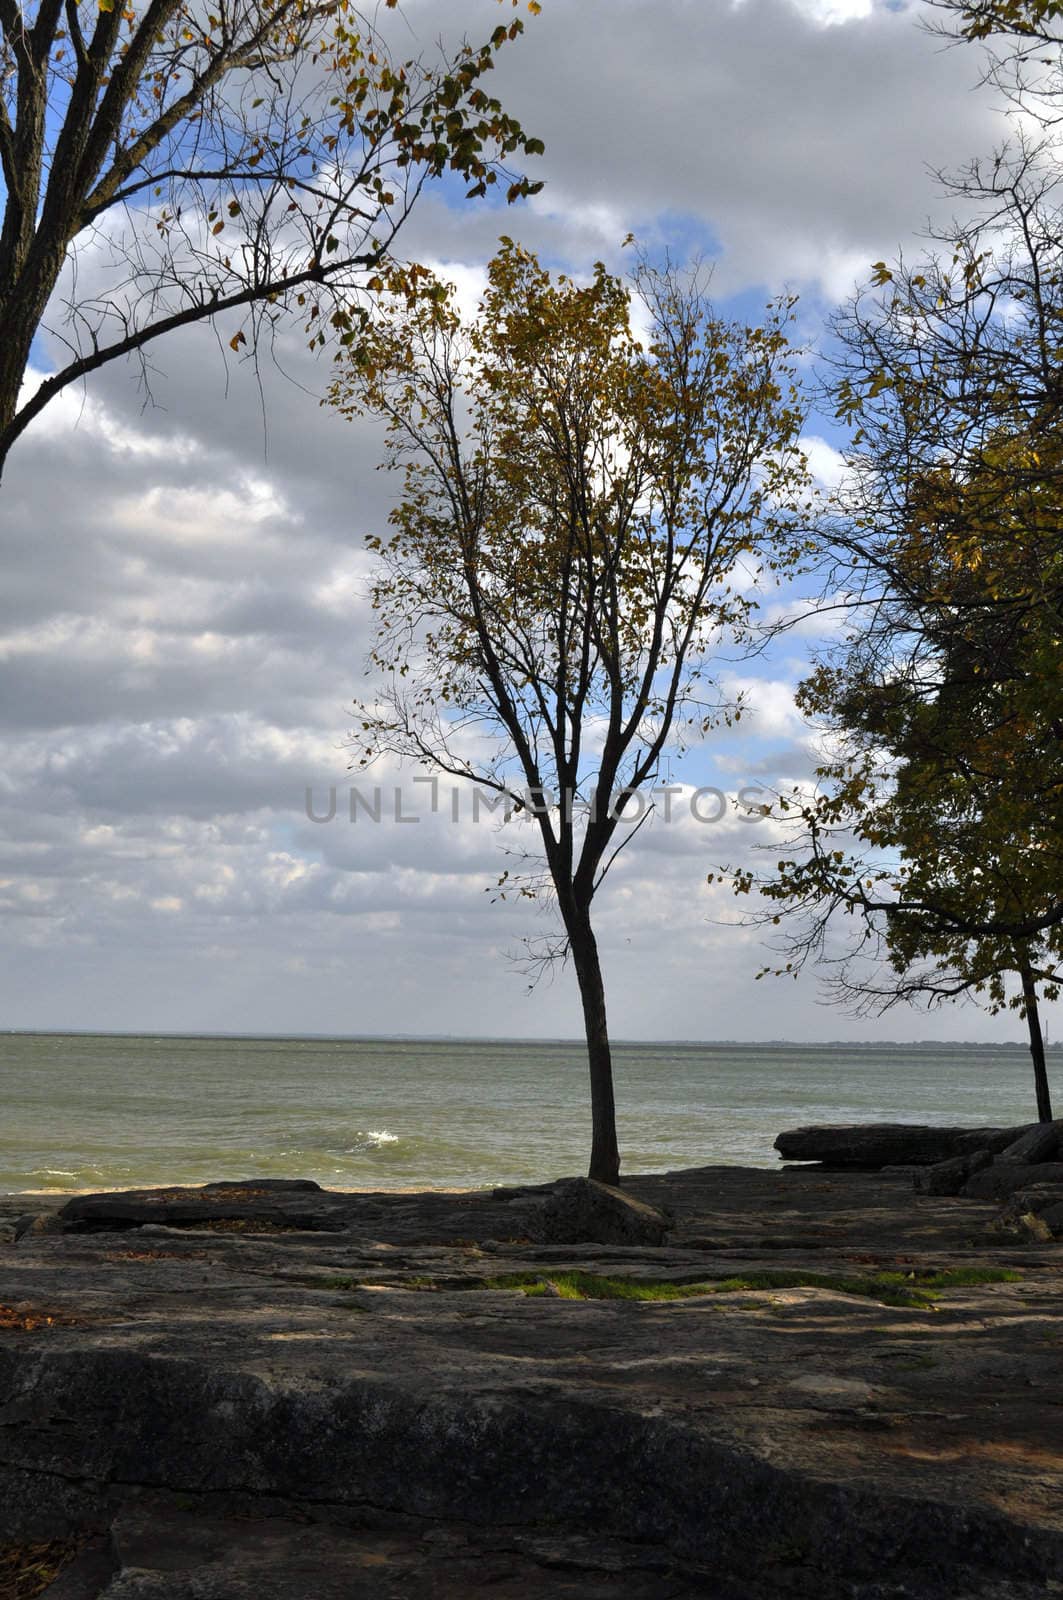 Rocks trees and water background by RefocusPhoto